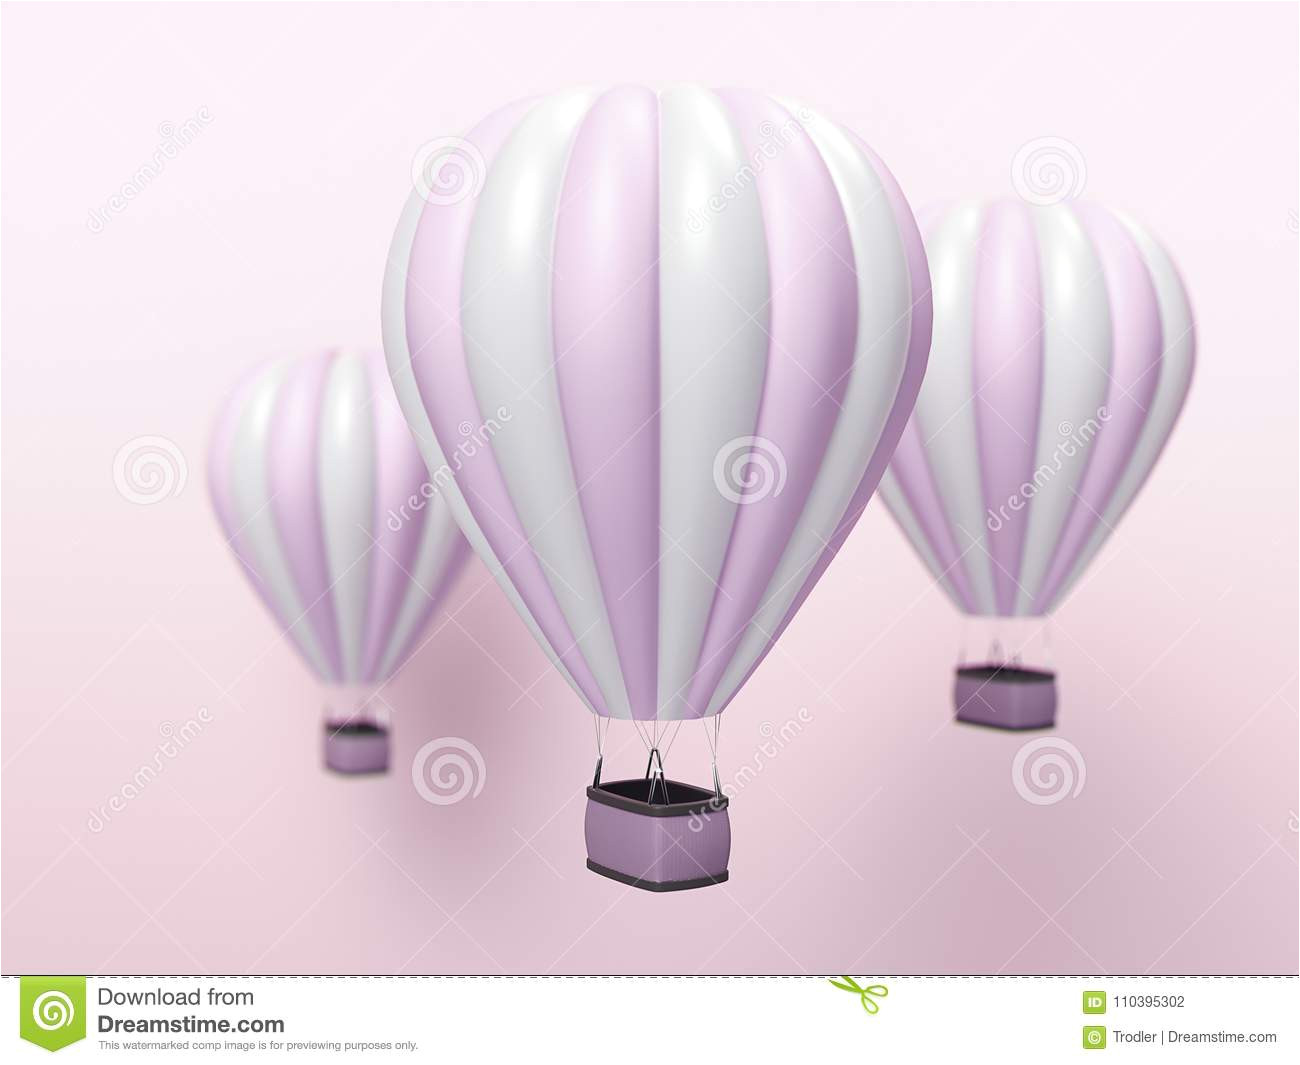 Blank Card Hot Air Balloon Hot Air Balloon White and Pink Stripes Colorful Aerostat On